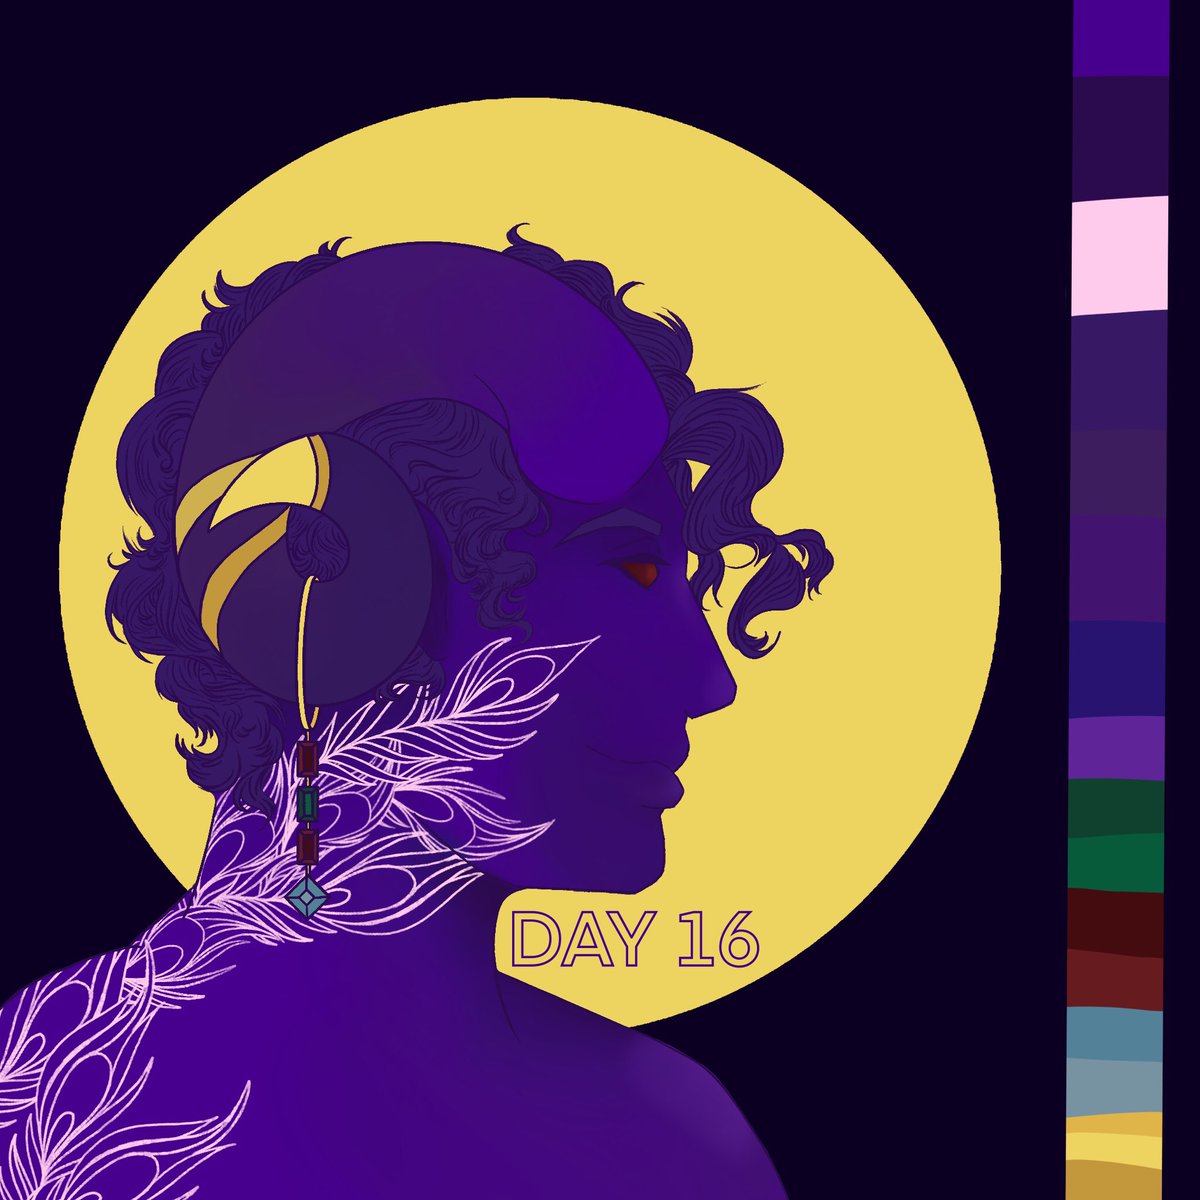 Mollymauk gets his one tweet because I love  @executivegoth too much. Long may he reign bitches  @CriticalRole  #criticalrolefanart  #criticalrole  #mollymauk  #MollymaukTealeaf